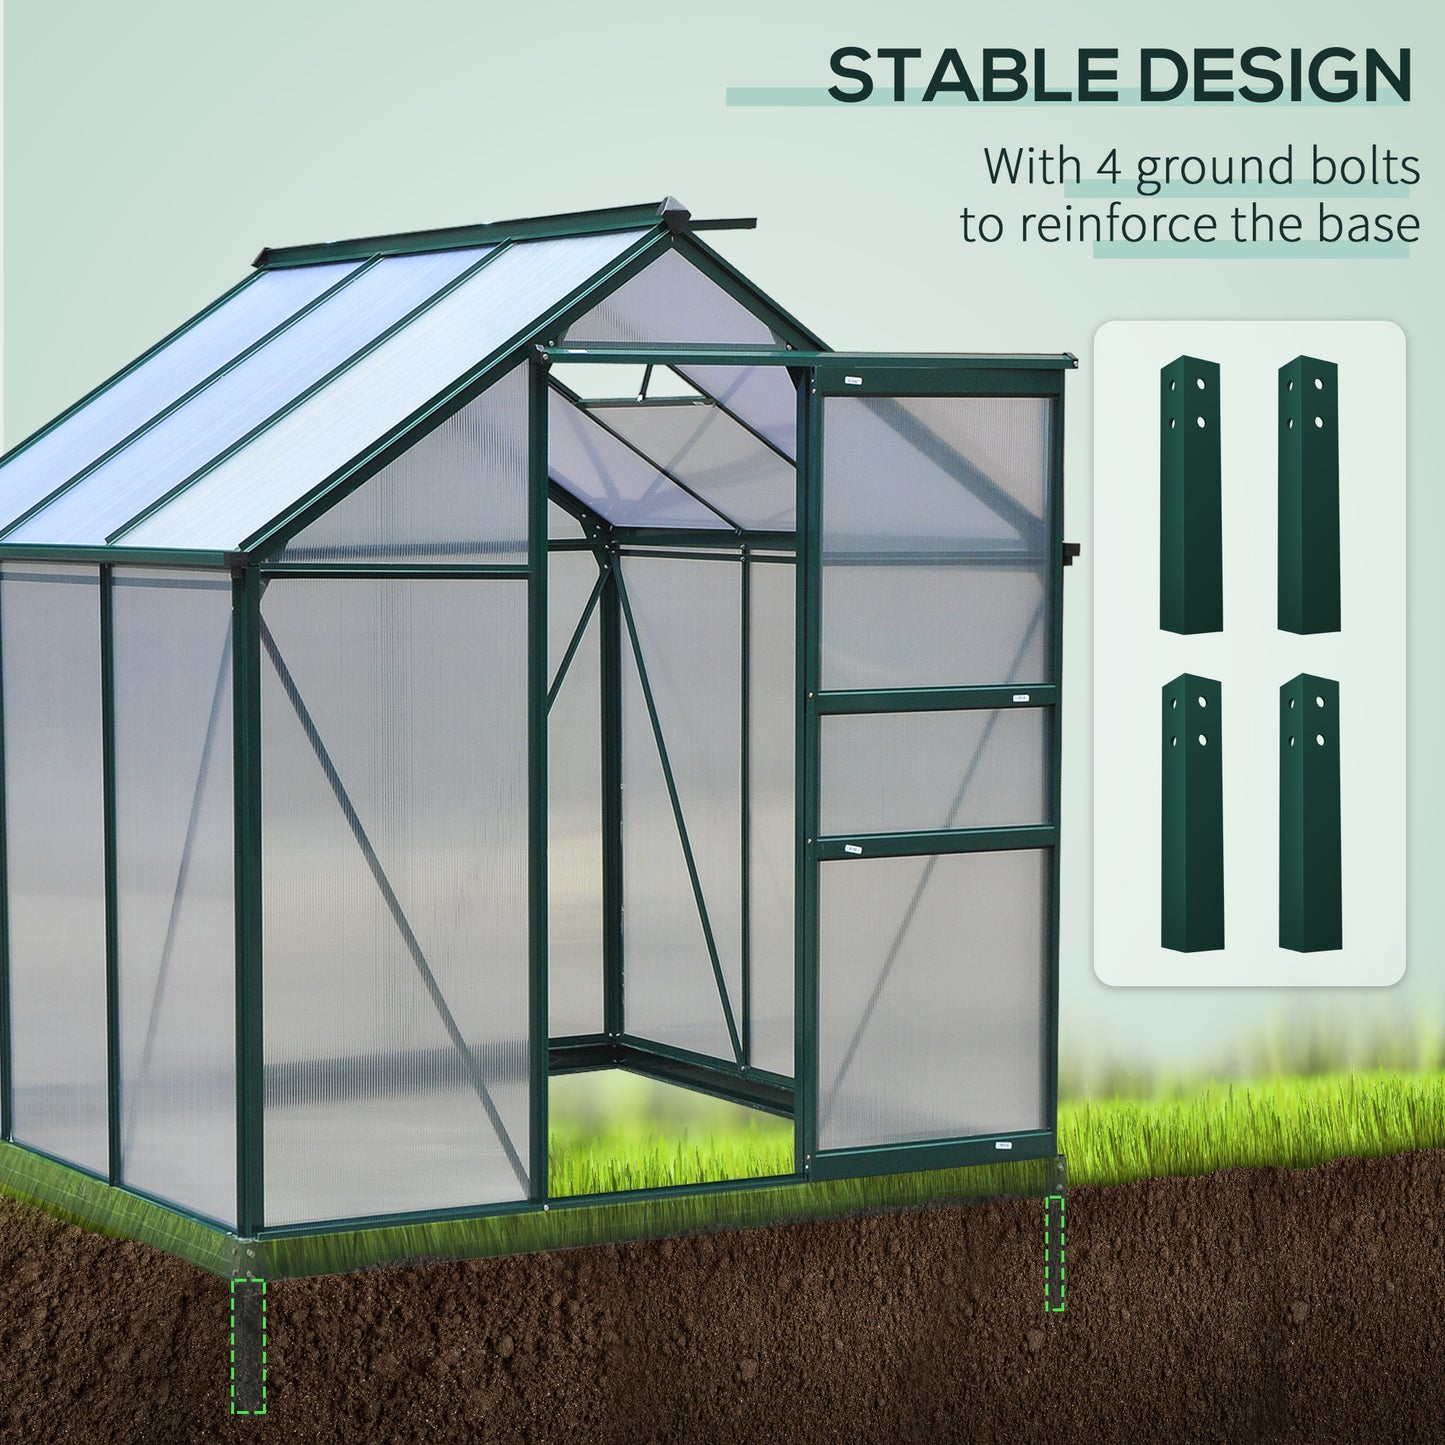 6.2' x 6.3' x 6.6' Clear Polycarbonate Greenhouse Large Walk-In Green House Garden Plants Grow Galvanized Base Aluminium Frame w/ Slide Door - Gallery Canada